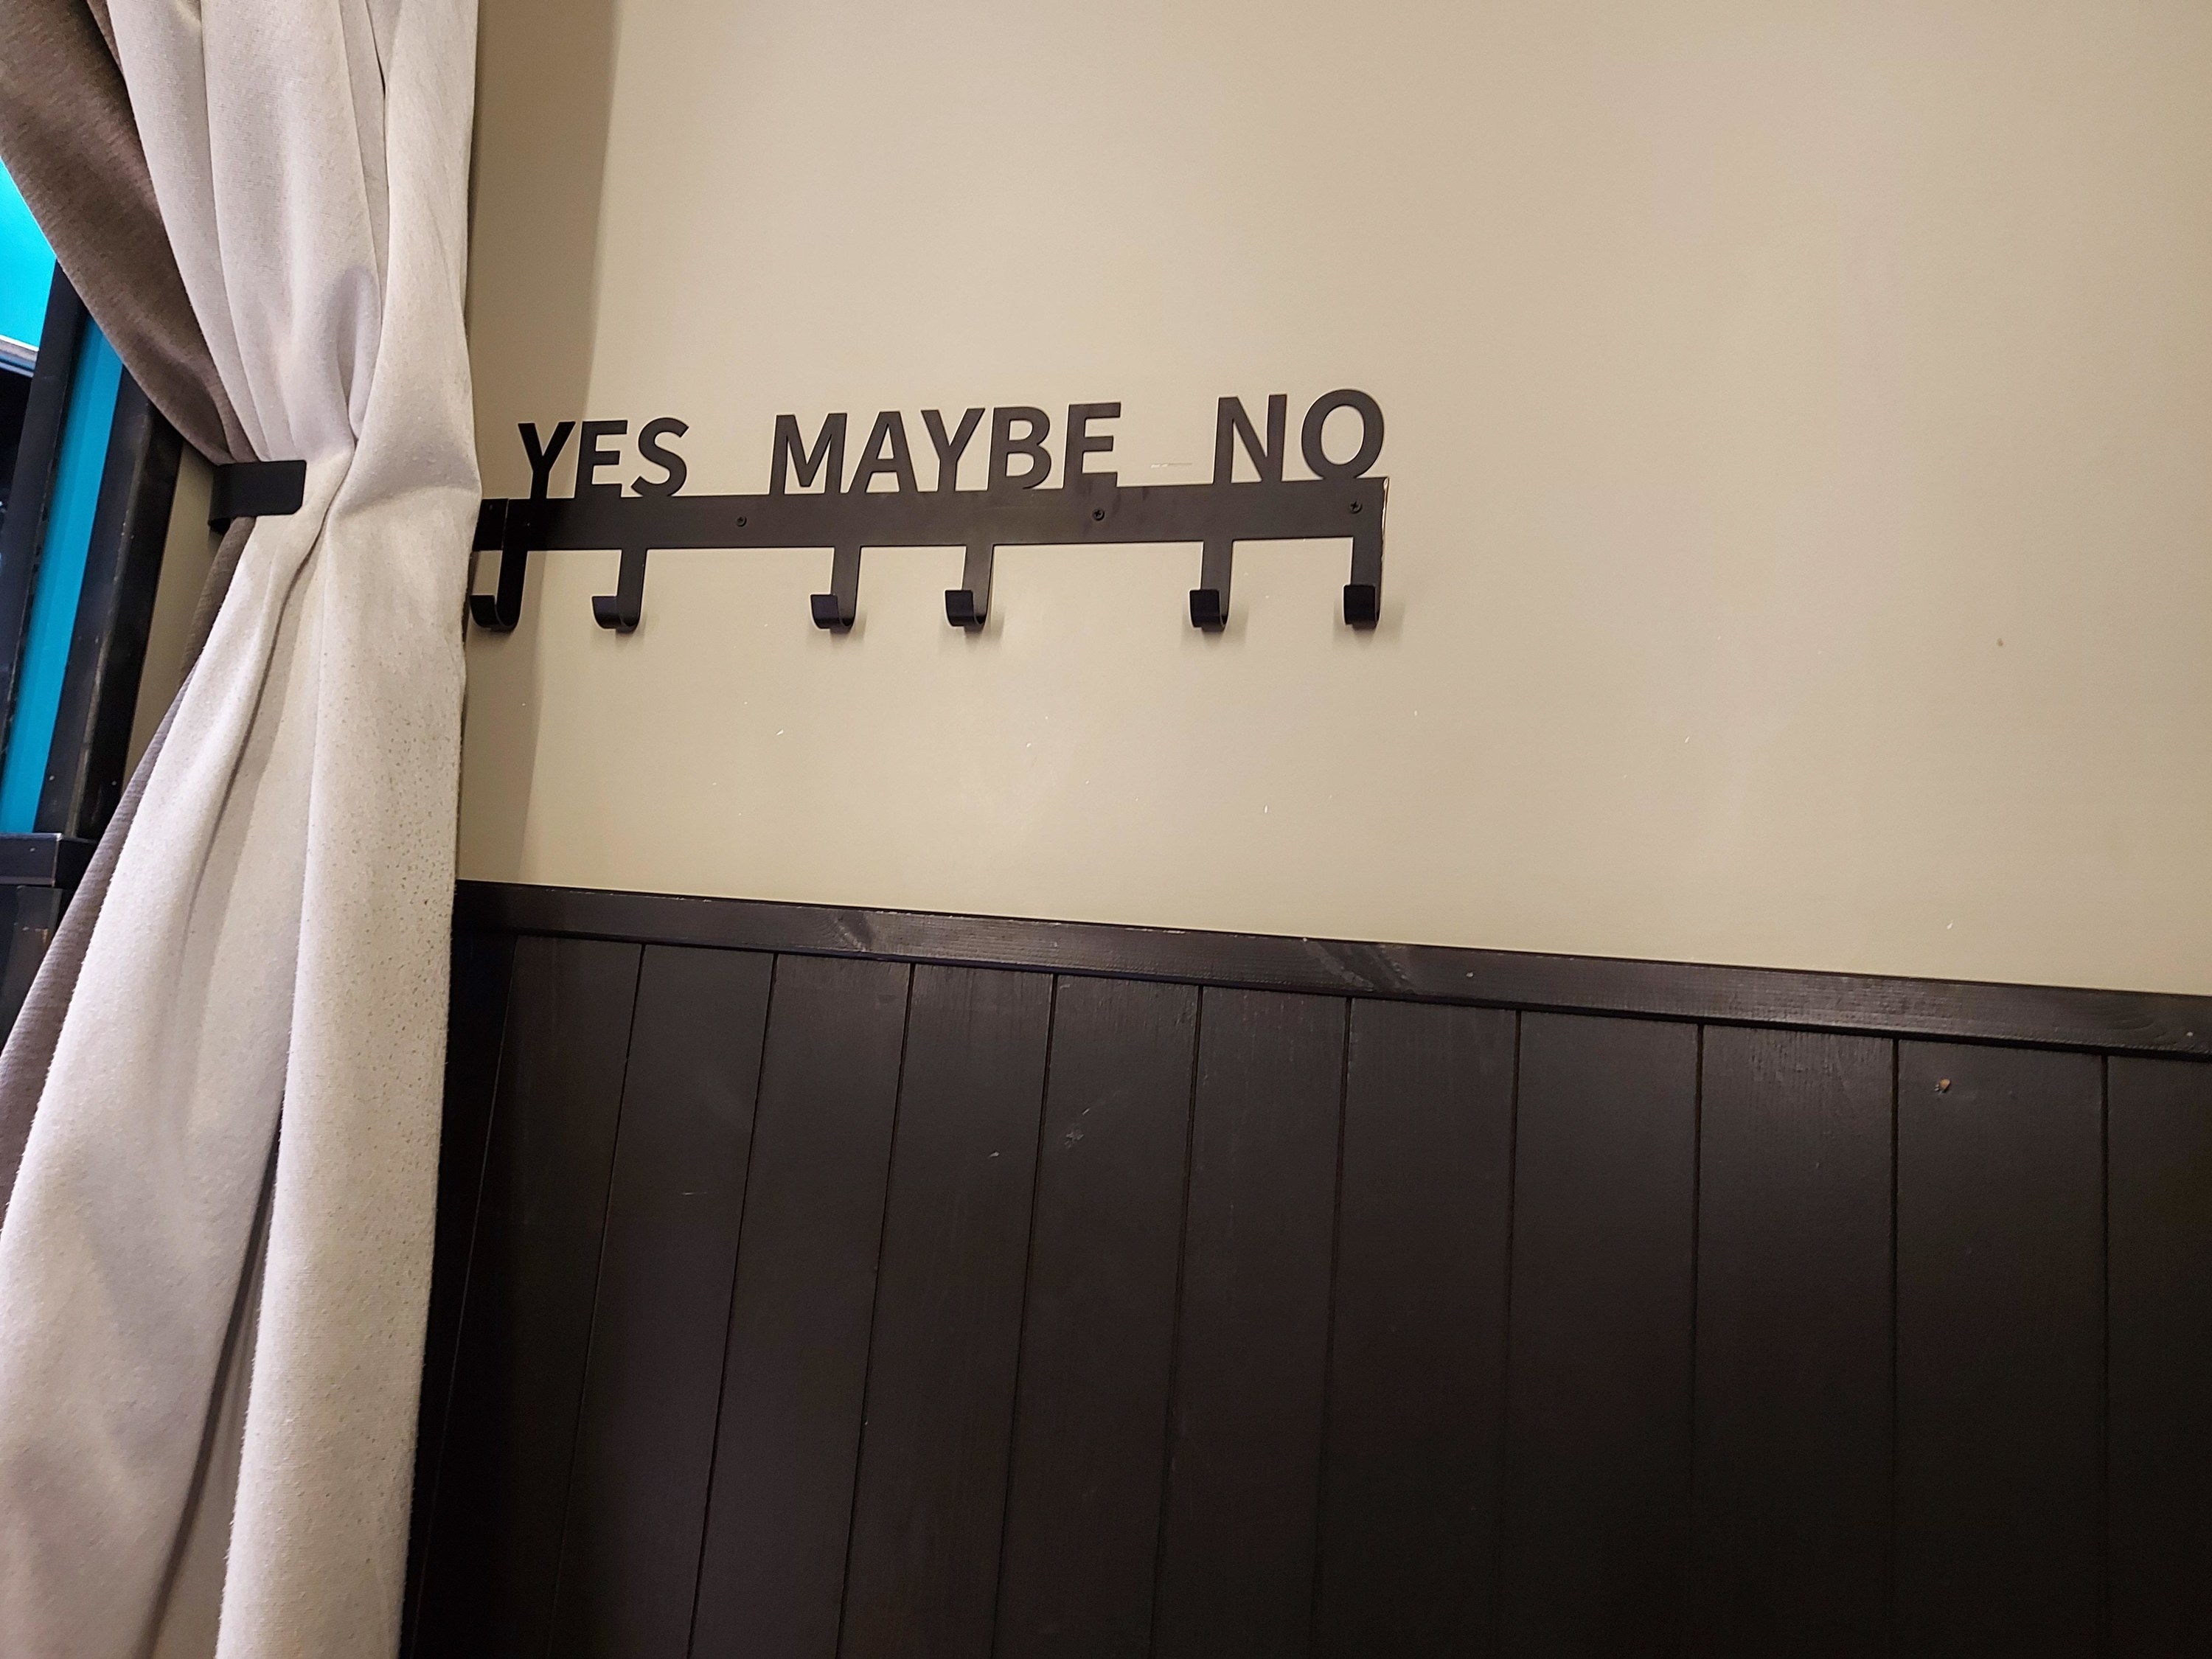 A hanger saying &quot;Yes Maybe No&quot;